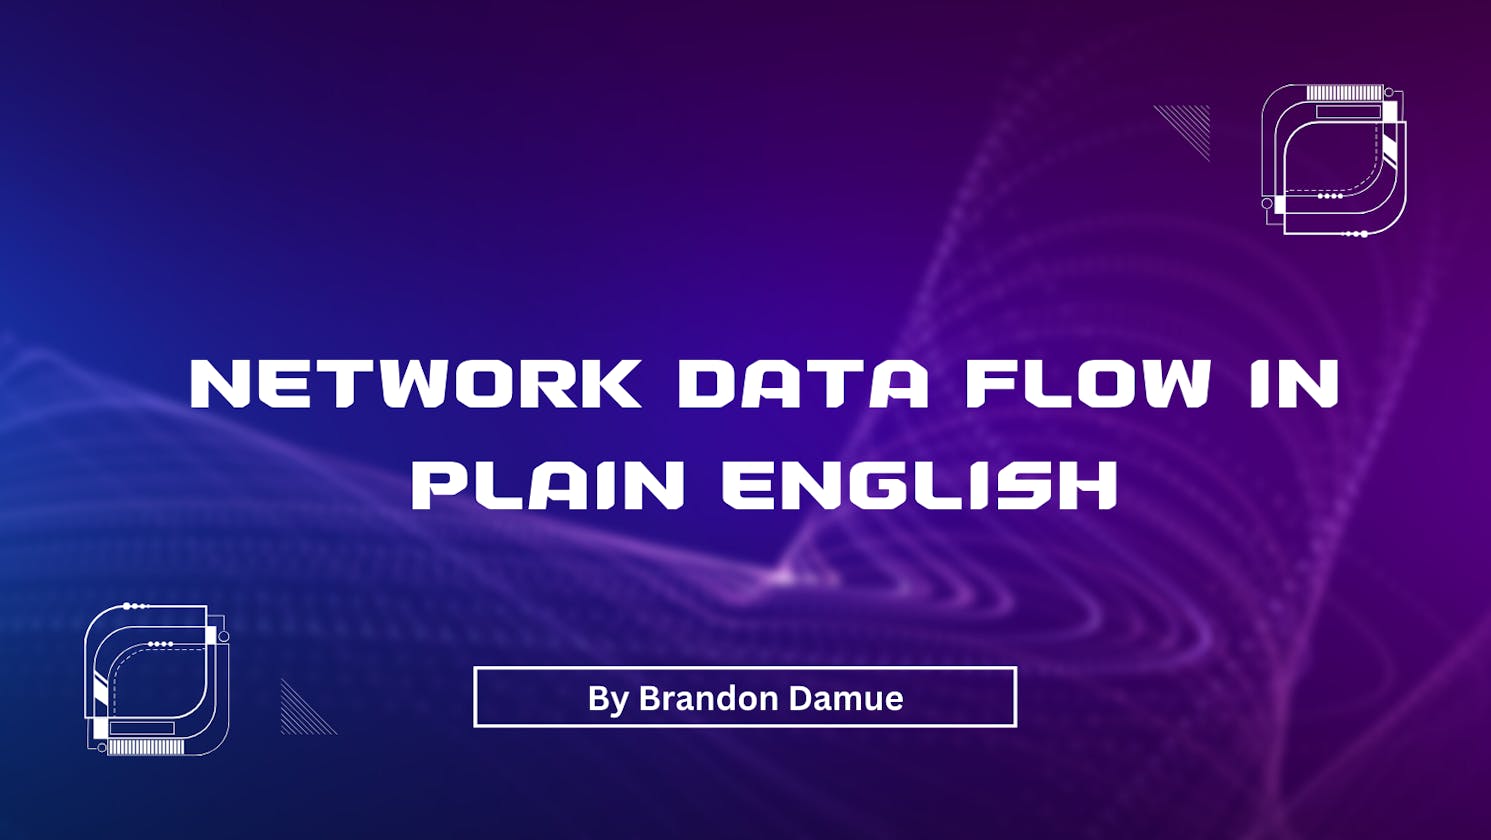 Network Data Flow in Plain English